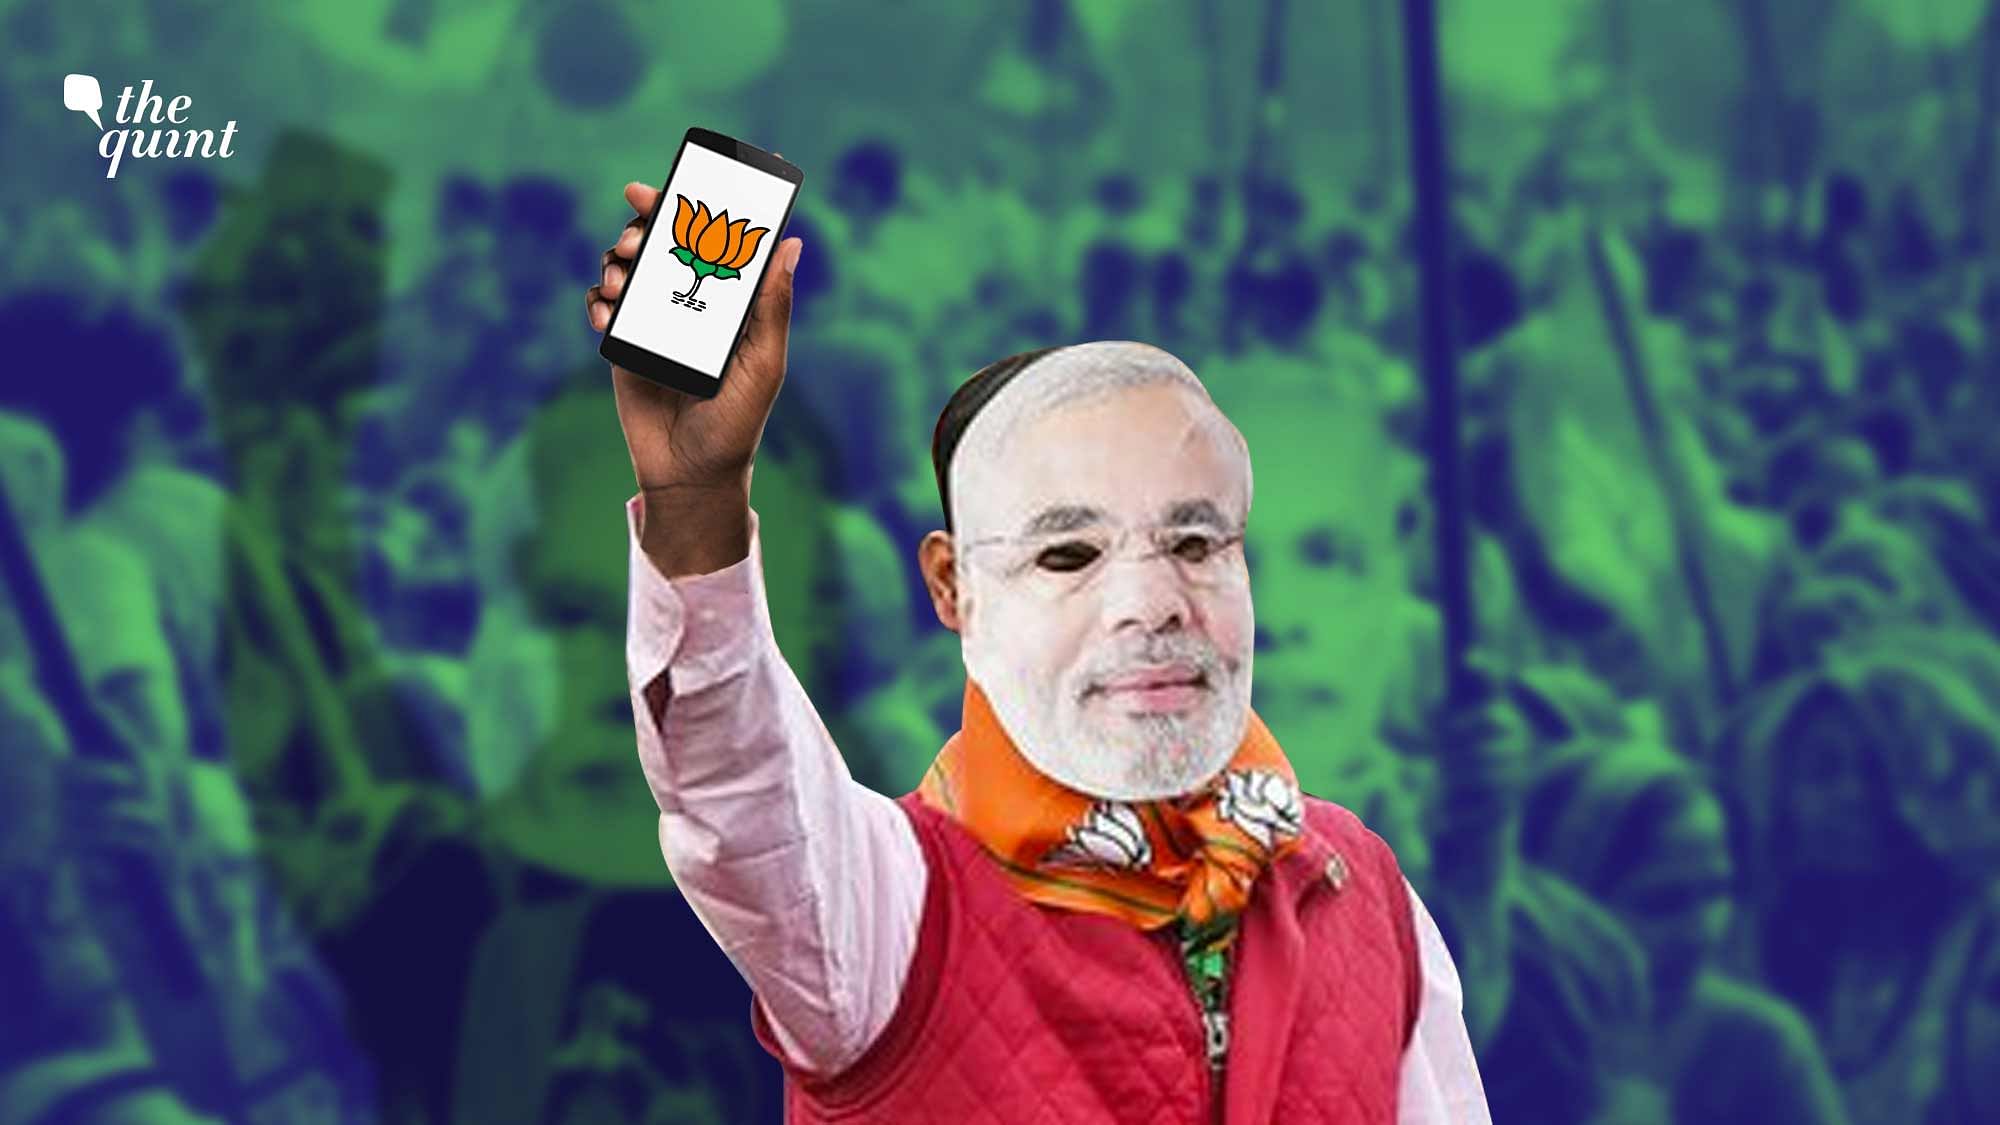 In a curious move, the BJP’s official campaign ads are now being paid for and running on the party’s proxy Facebook pages, reaching voters across Delhi during the silence period.&nbsp;